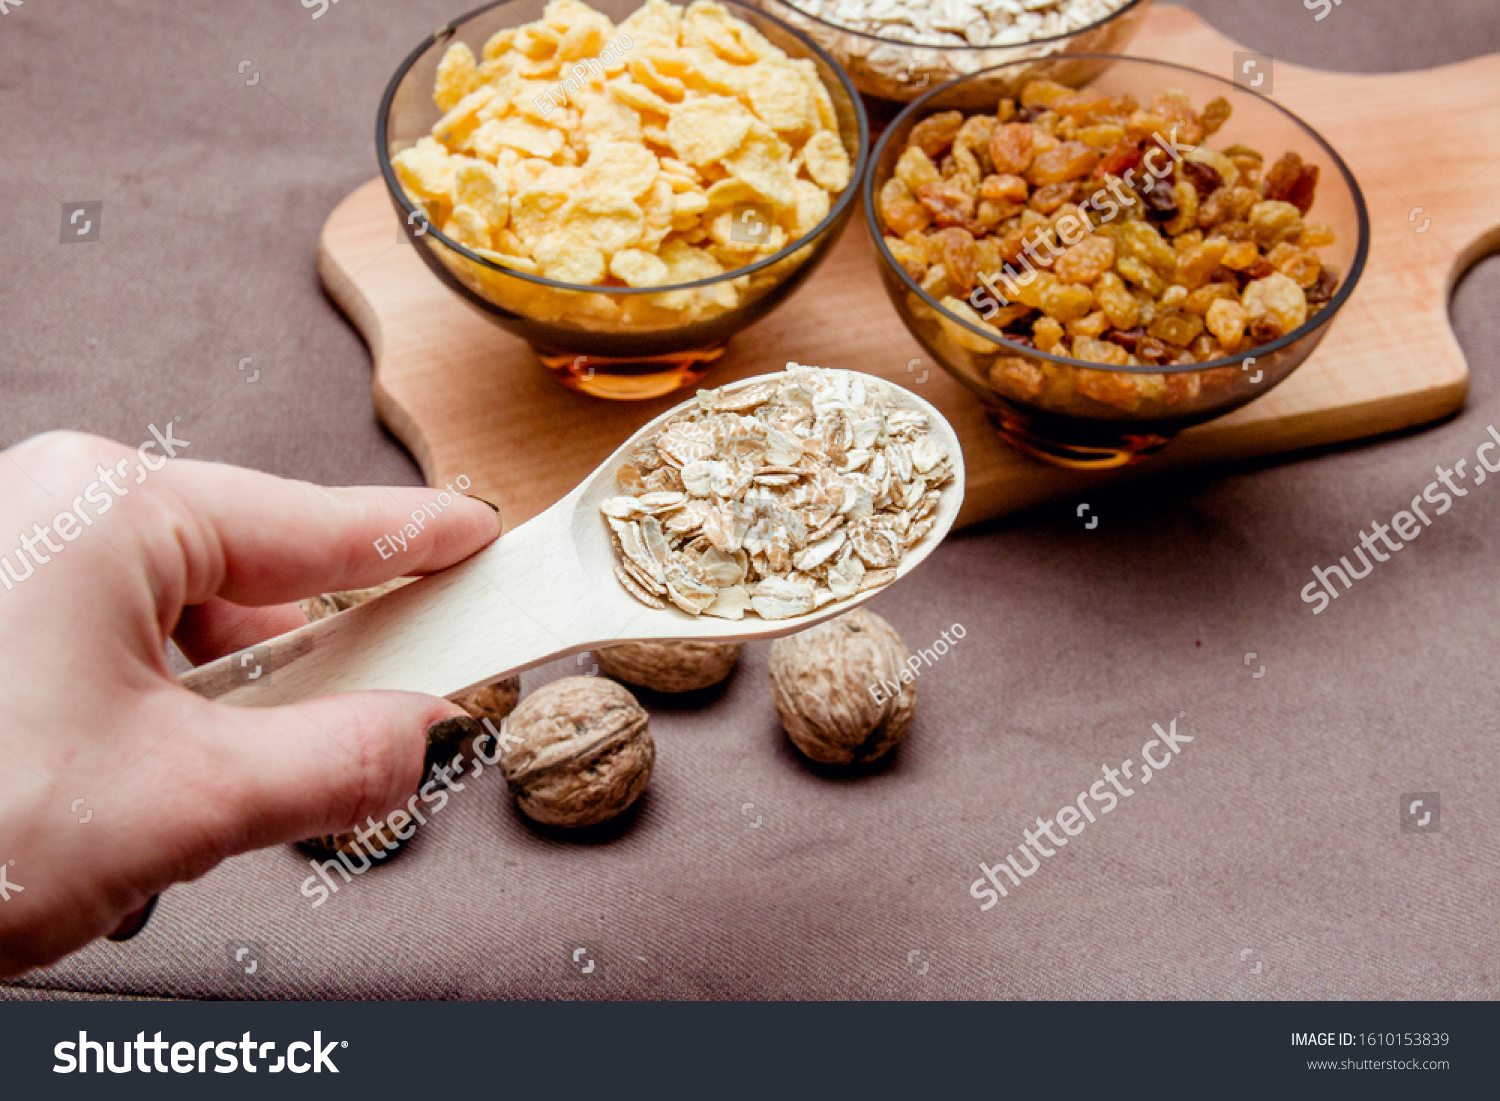 variations of cereals, raisins and walnuts on a decorative background #1610153839